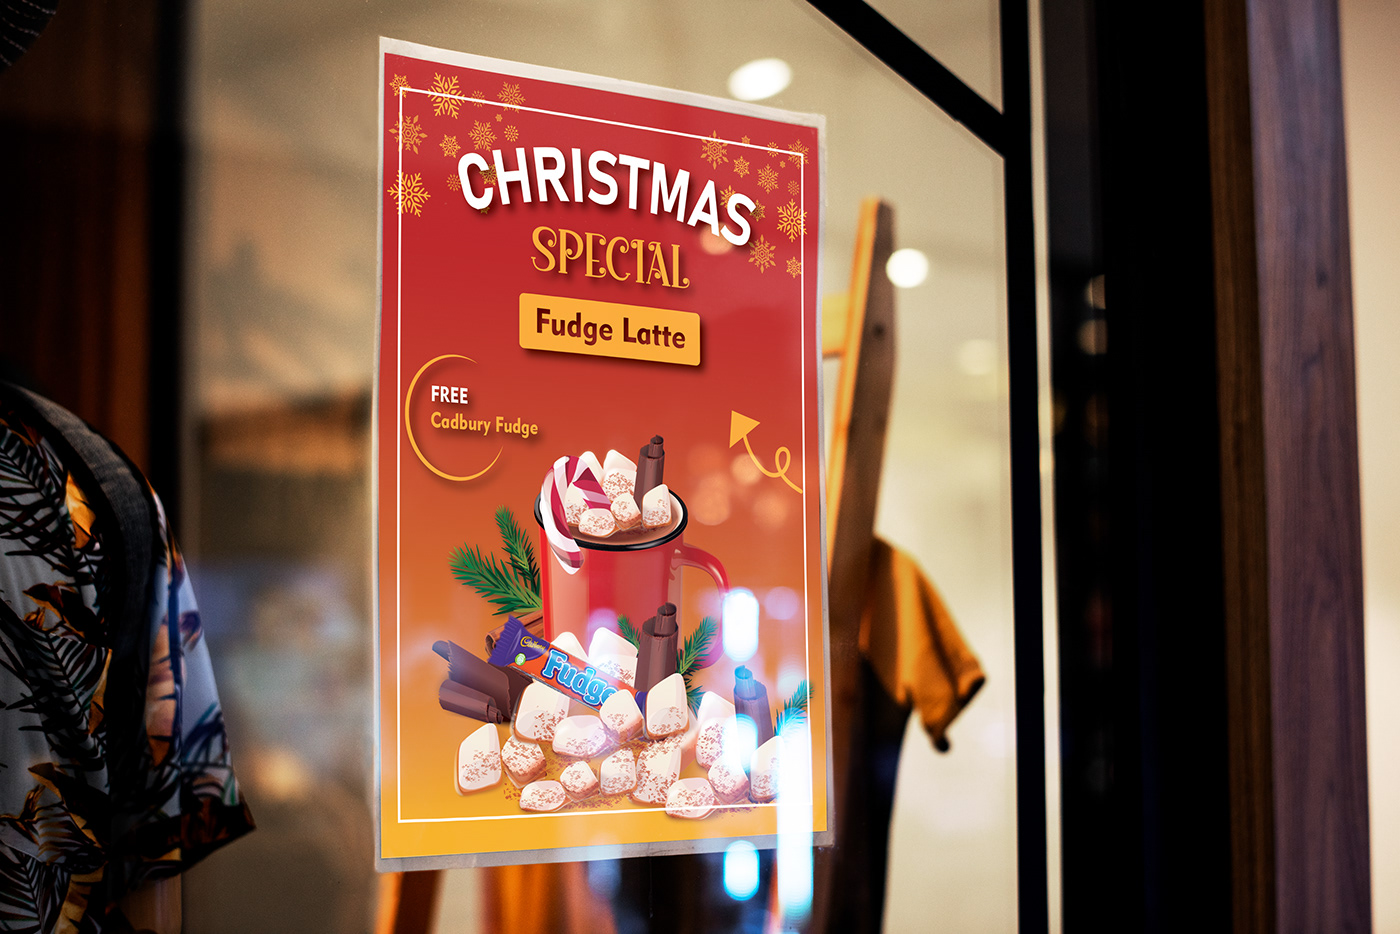 A4 Posters BEST POSTER Christmas Theme Posters creative posters Poster Design posters